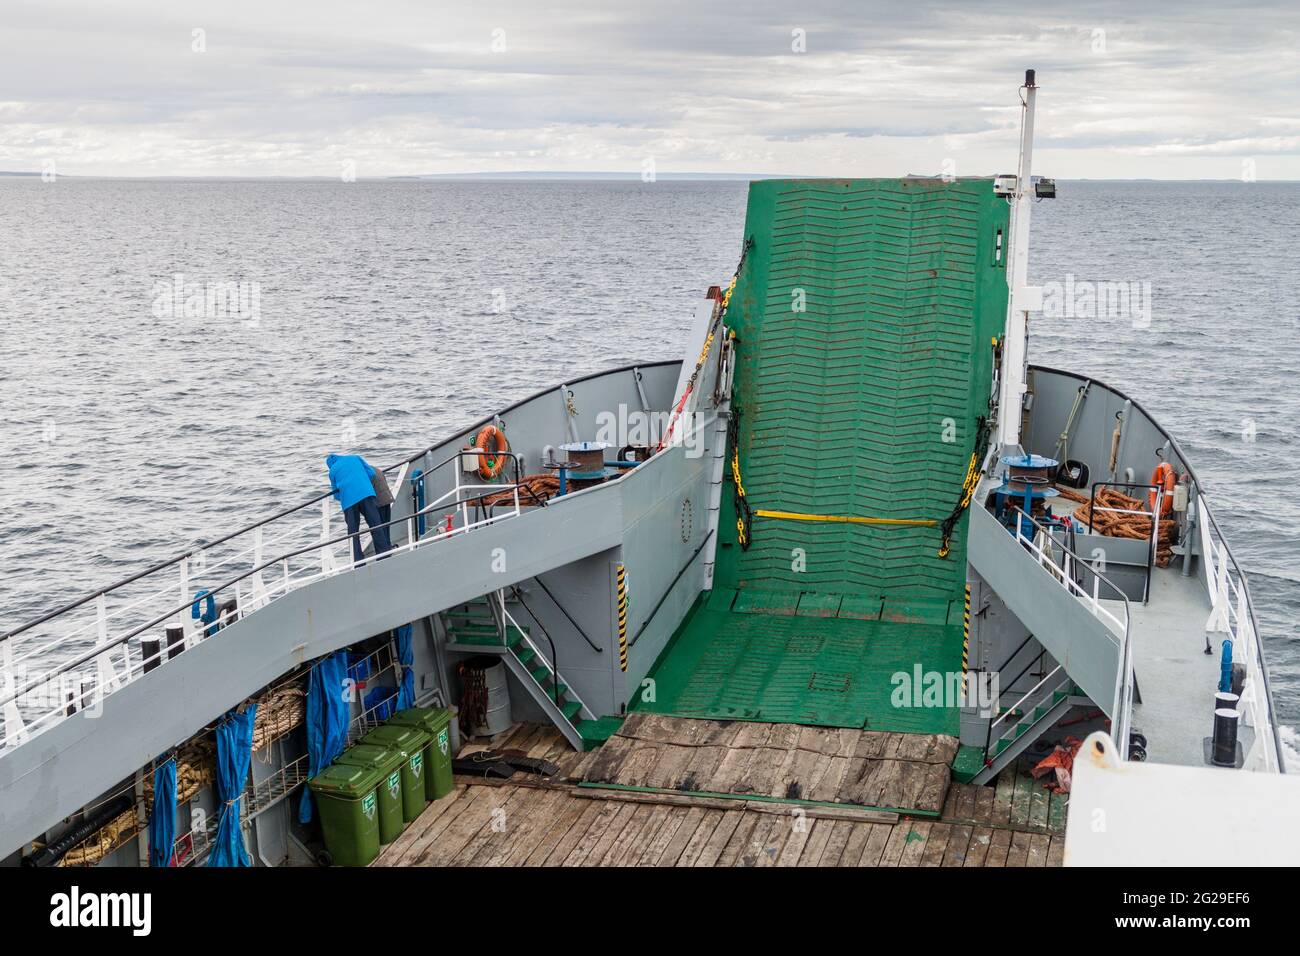 PUNTA ARENAS, CHILE - MARCH 4, 2015: Ferry Melinka heading to Penguin colony on Isla Magdalena island in Magellan Strait, Chile Stock Photo